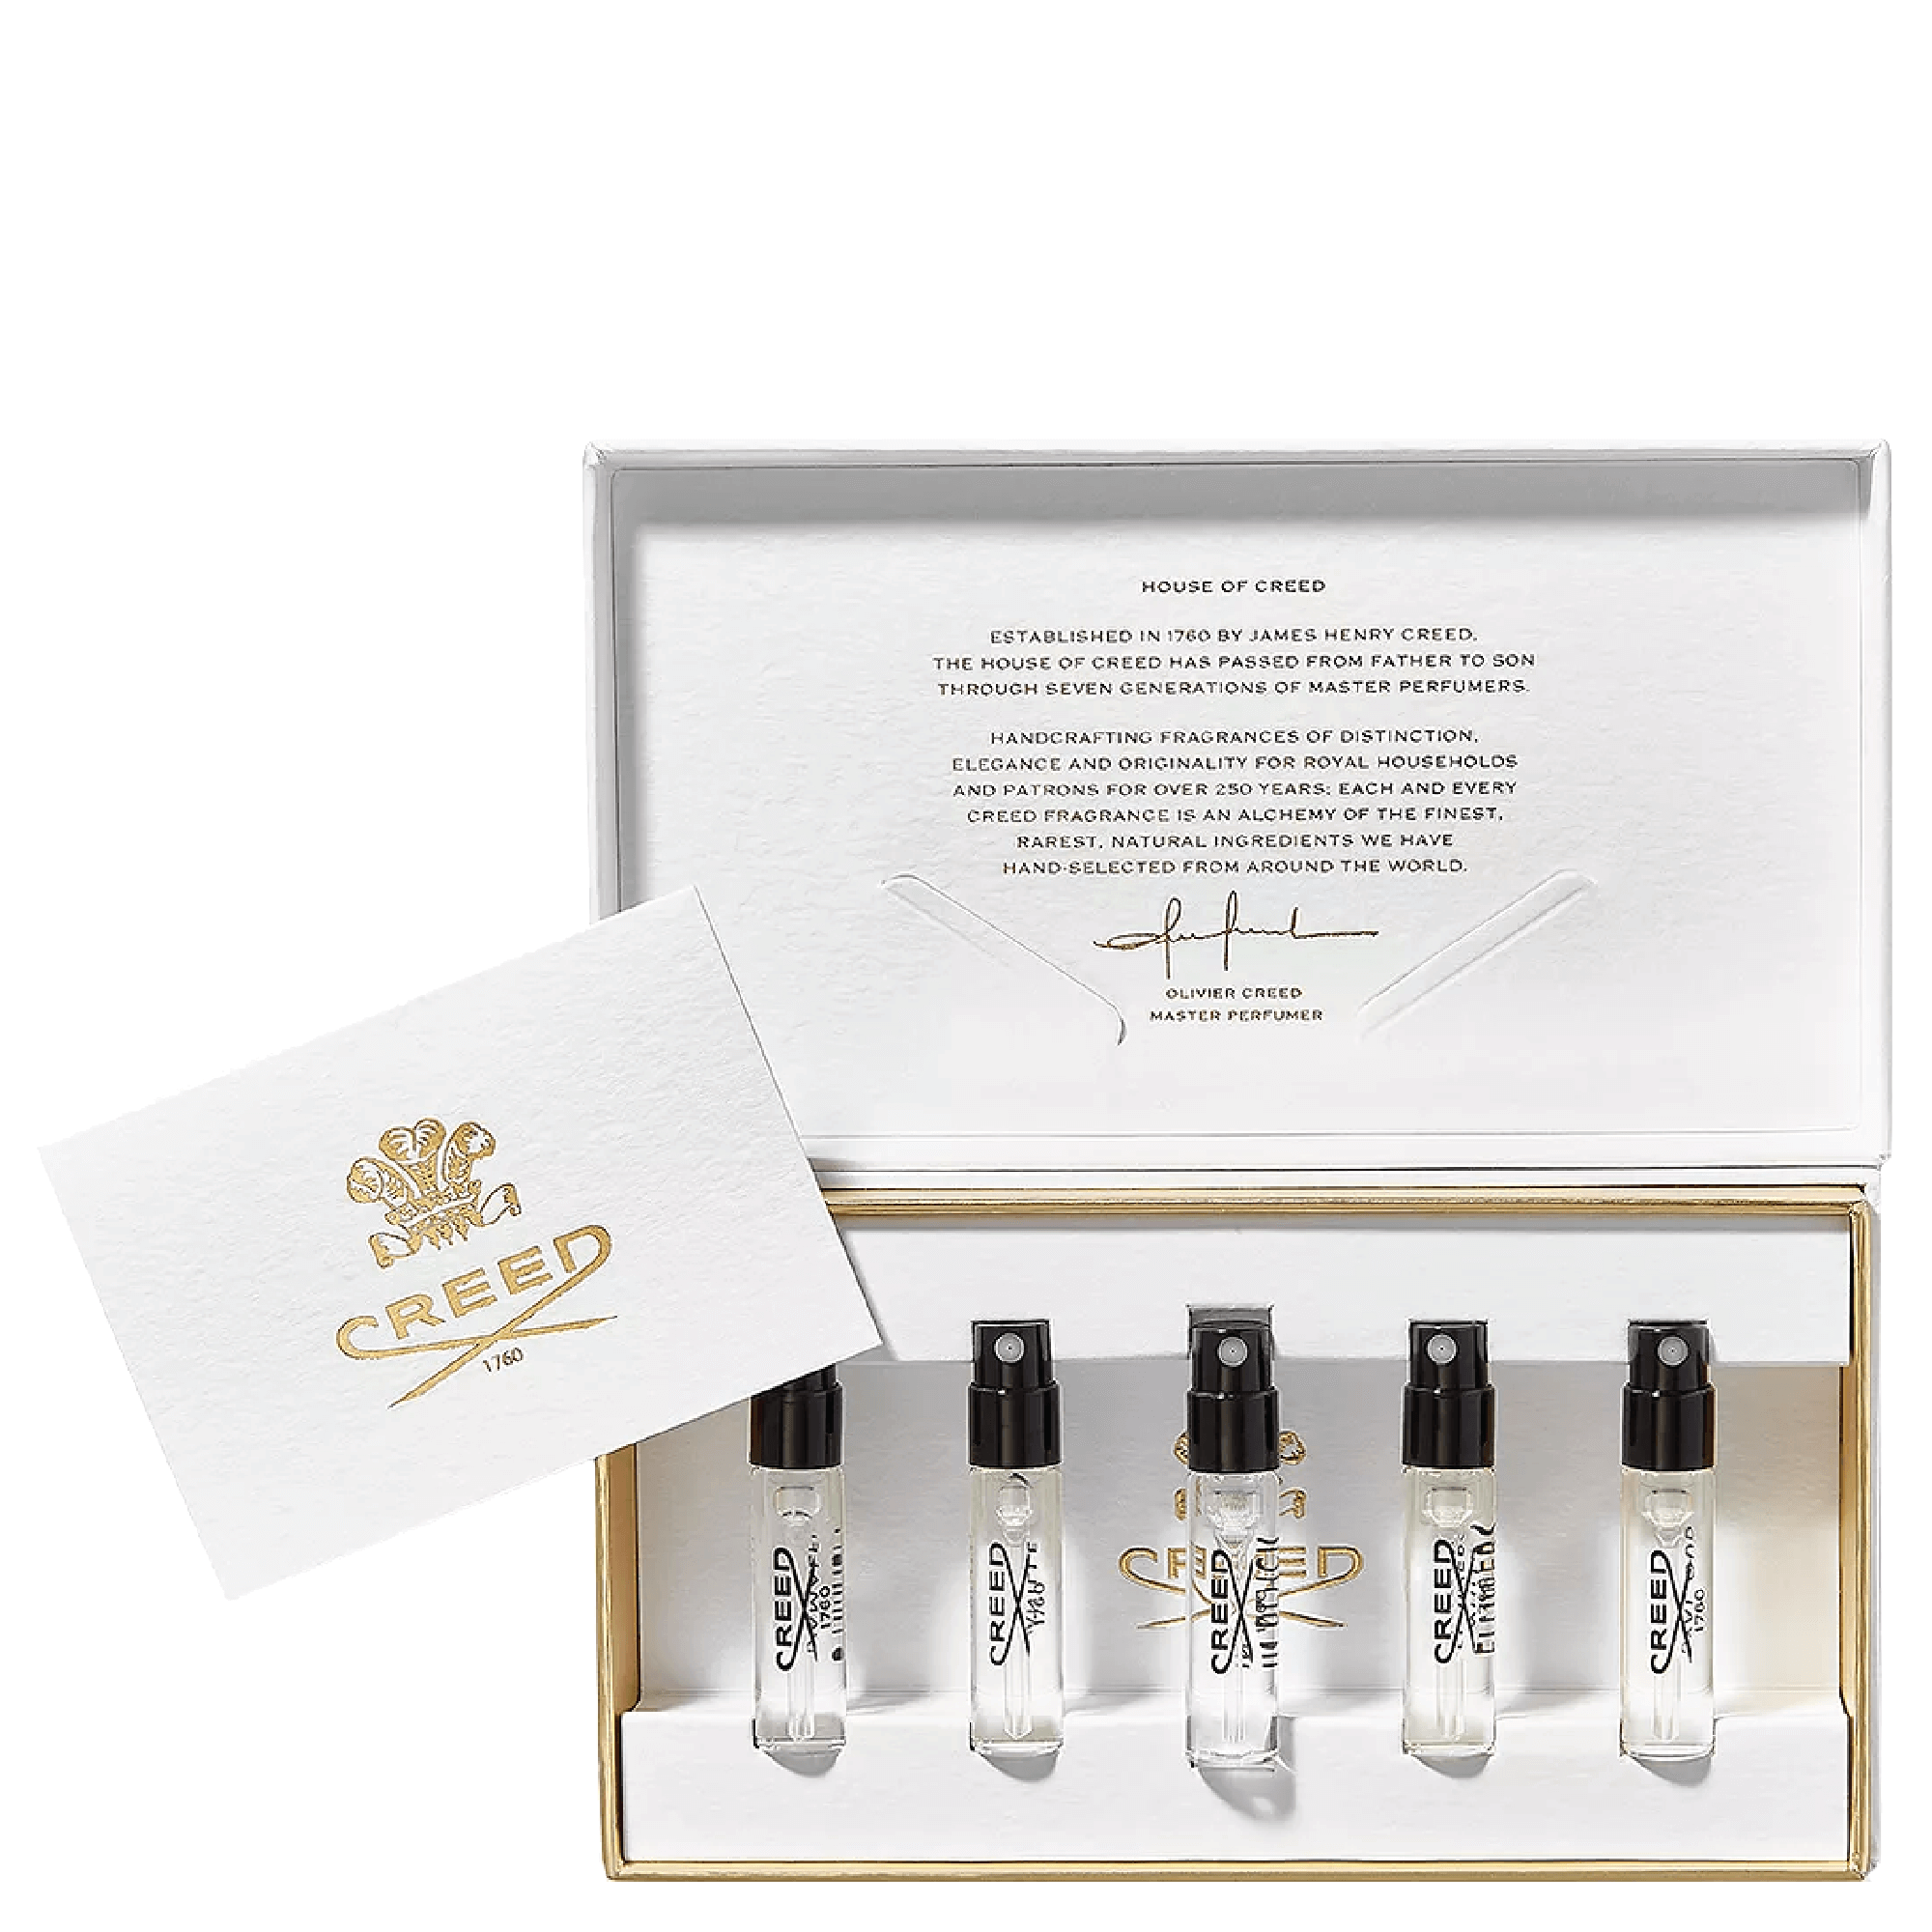 All Fragrance Samples, Discovery Sets